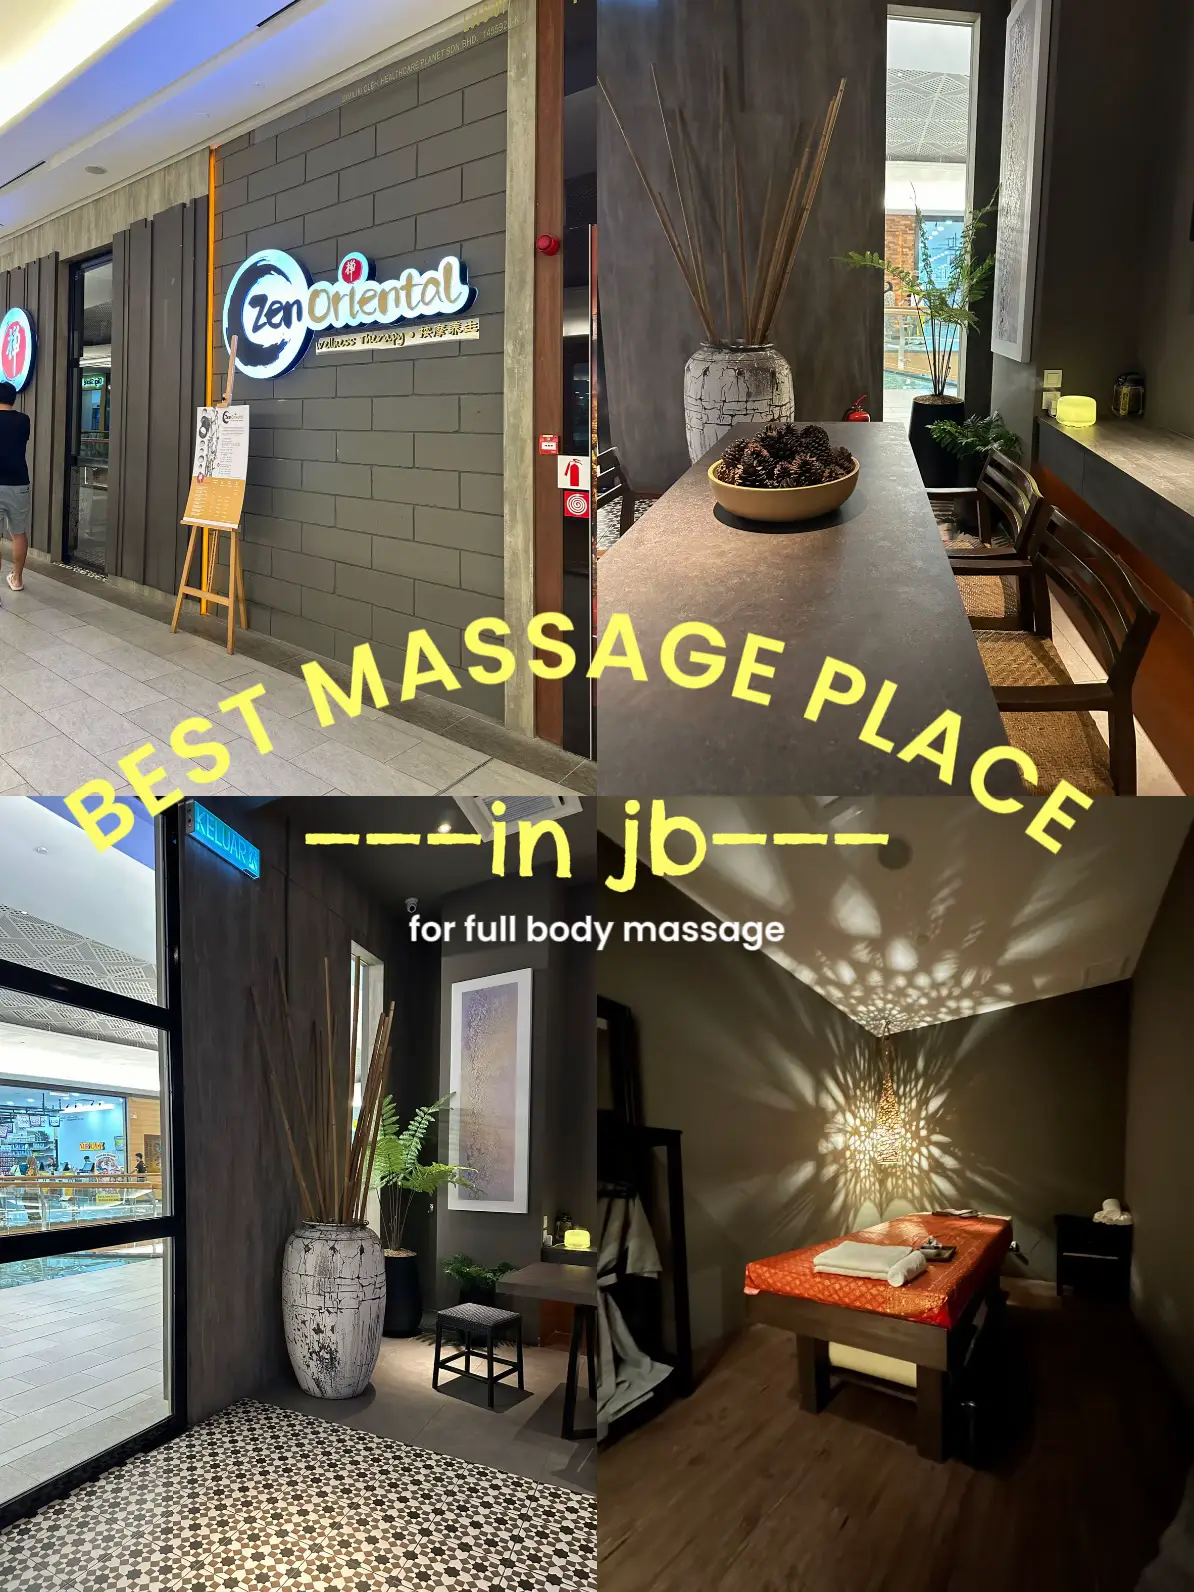 ✨⭐️ favourite massage place in jb's images(0)